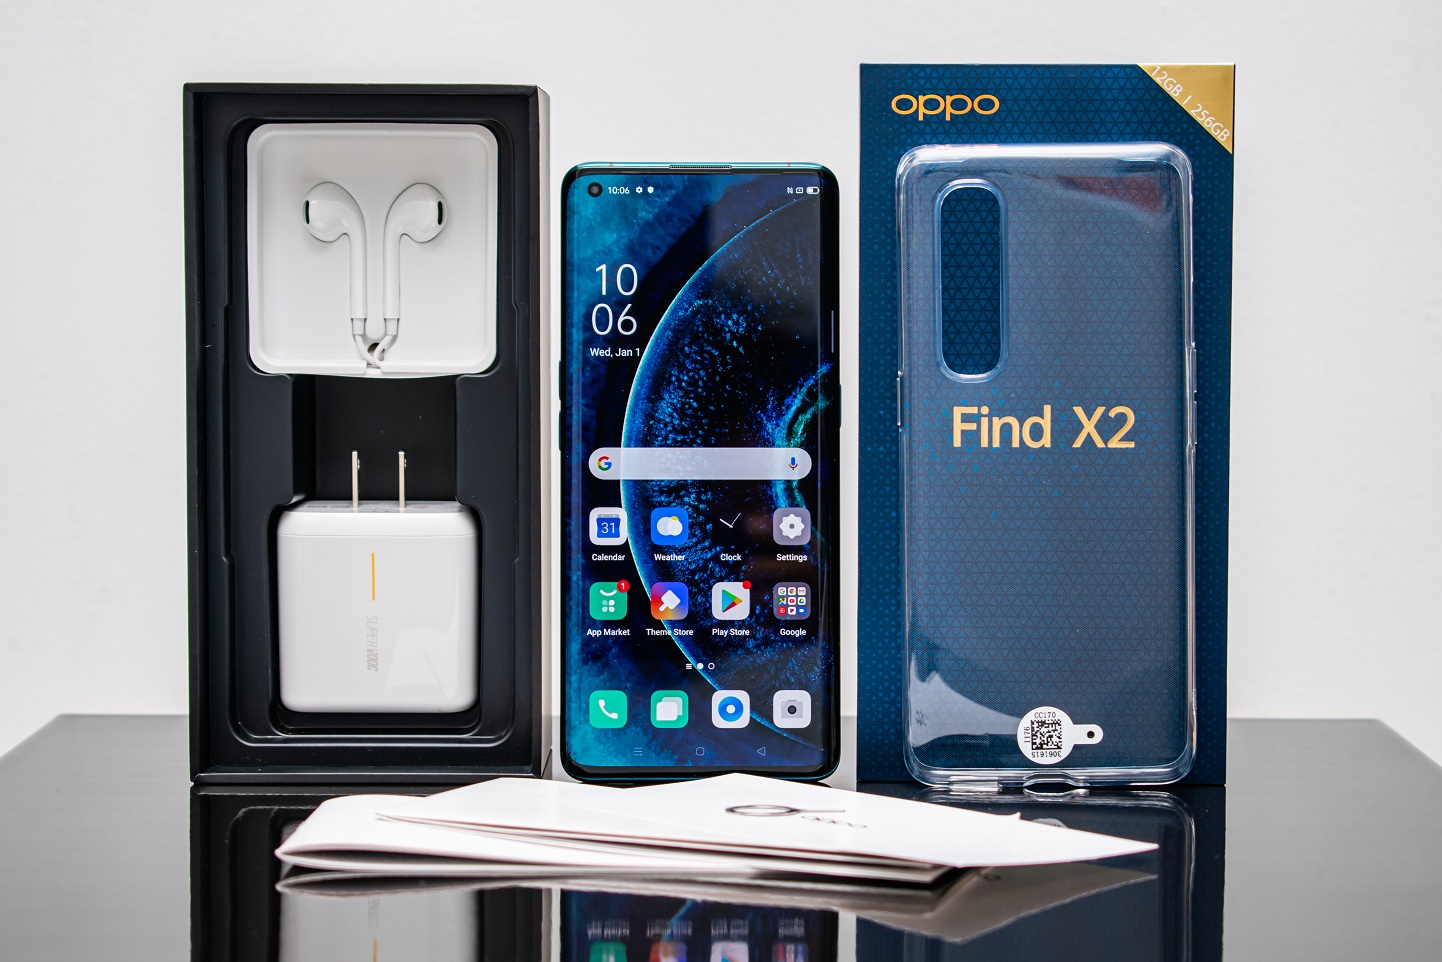 Mở hộp OPPO Find X2 2